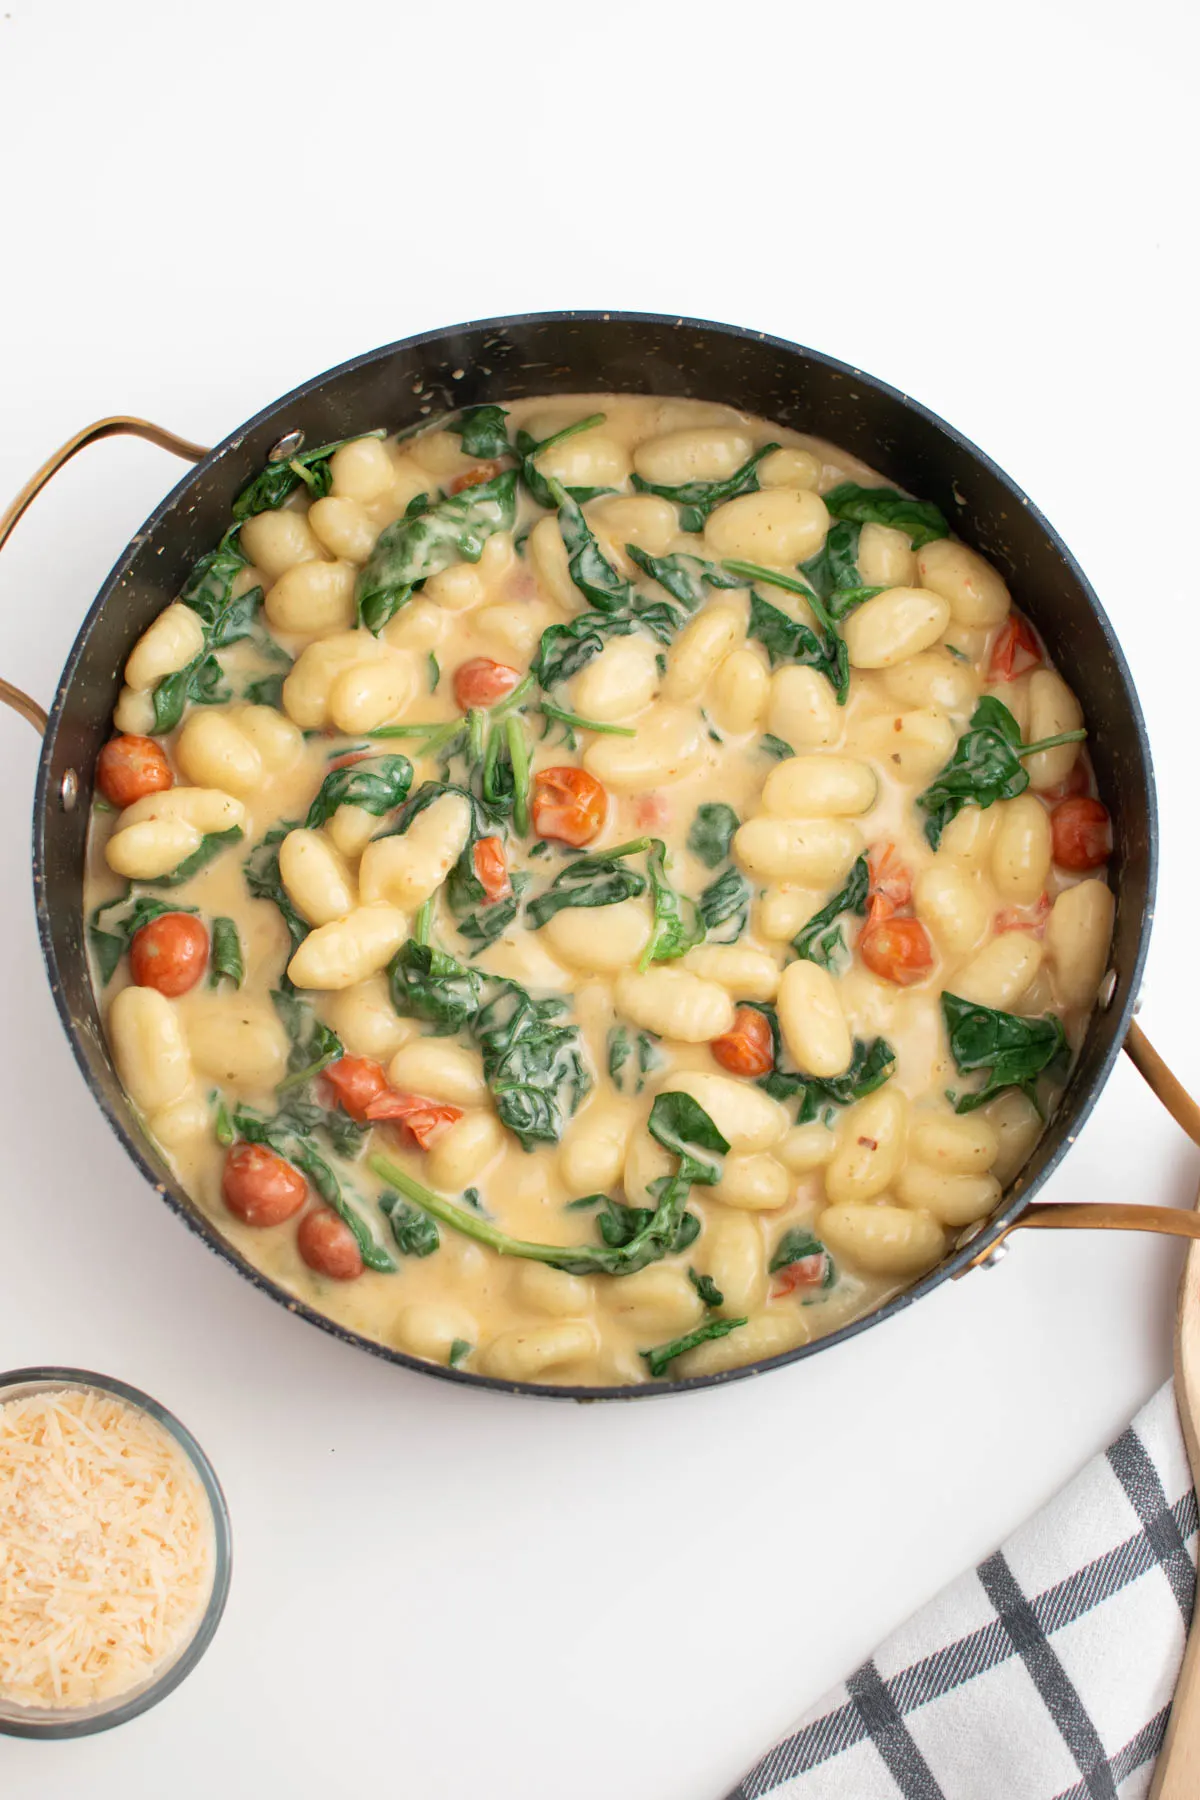 Large black skillet full of gnocchi, tomatoes, and spinach next to bowl of parmesan cheese.